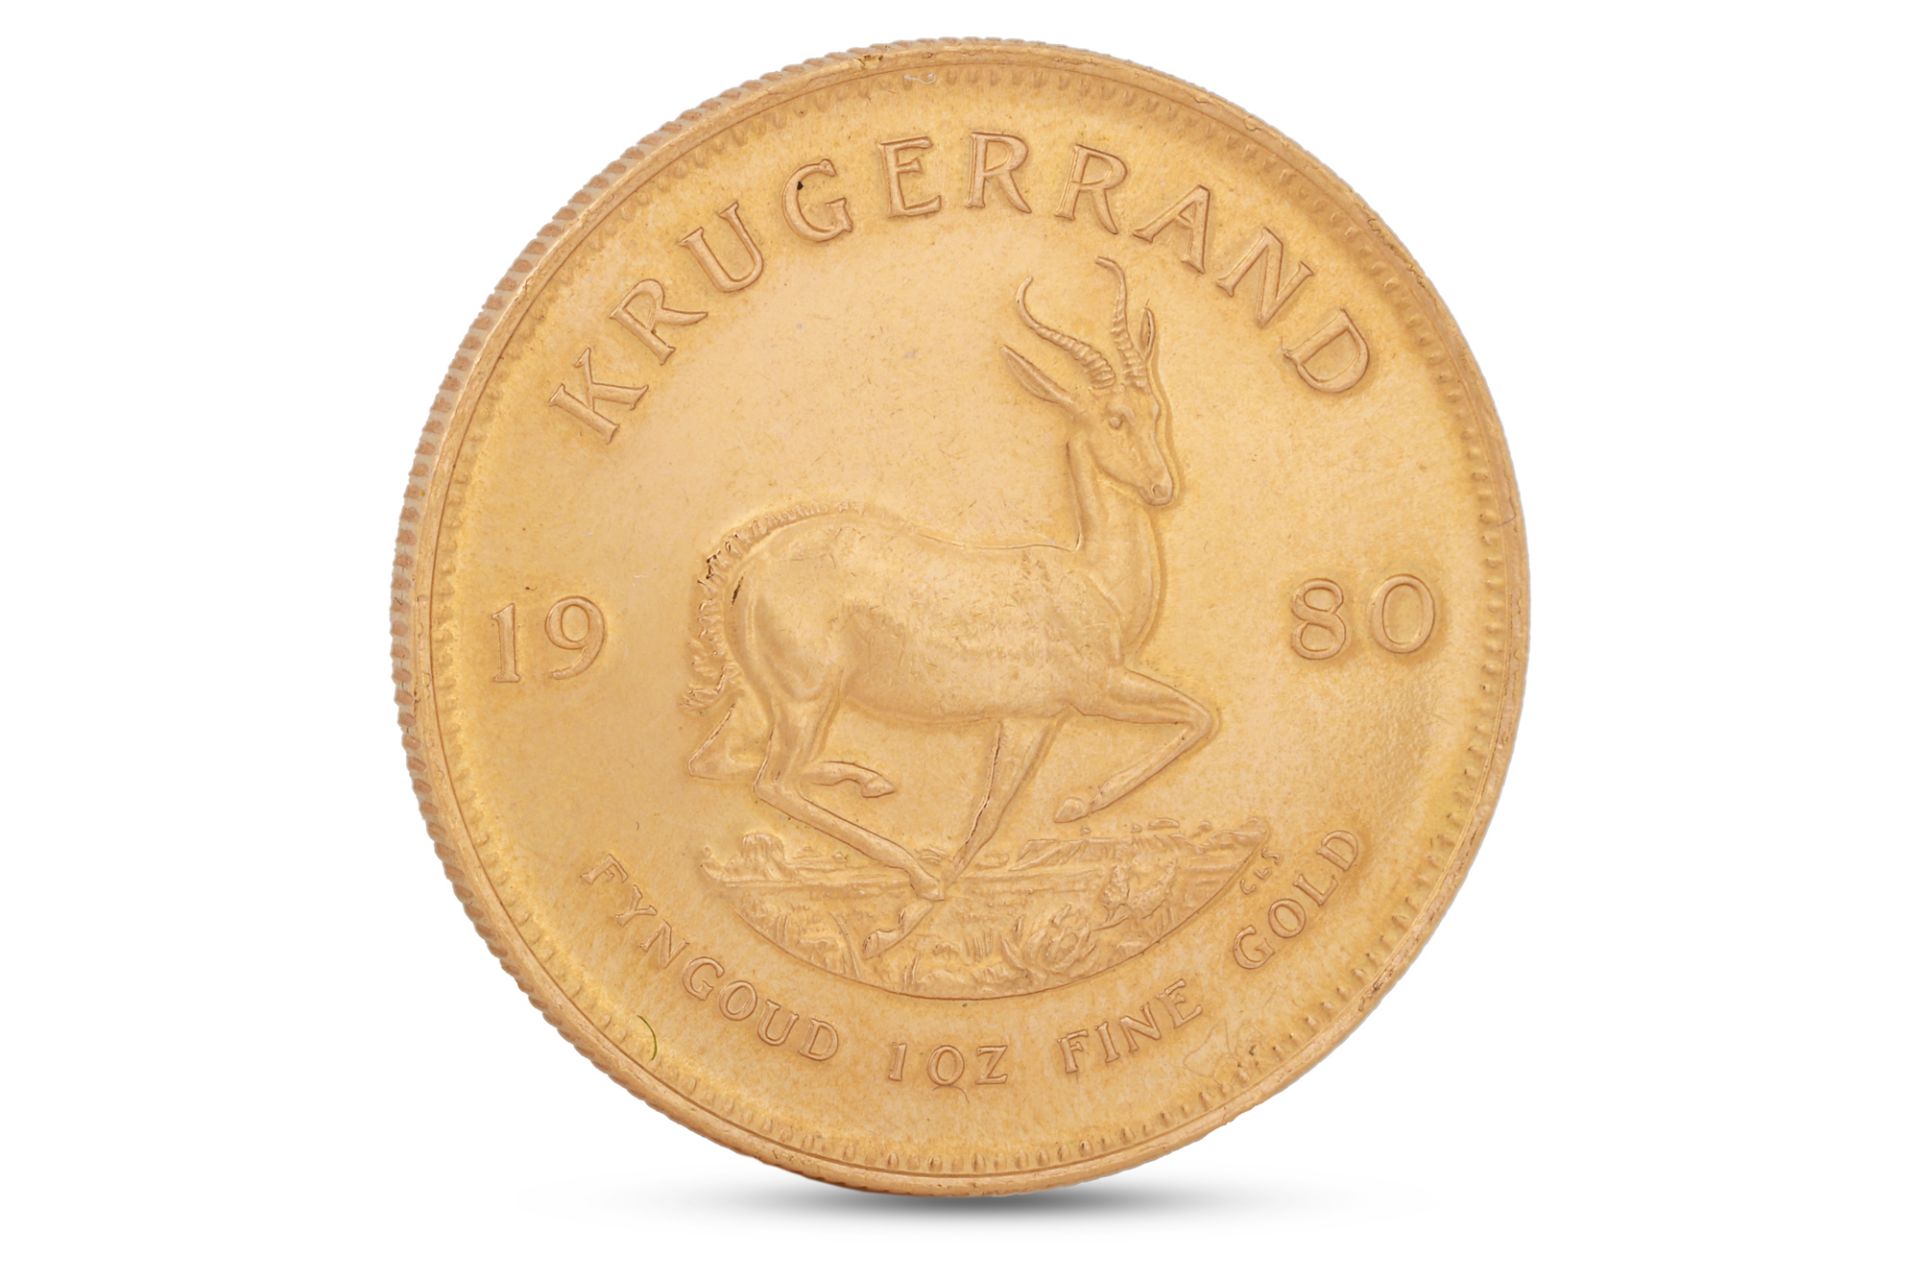 A 1980 SOUTH AFRICAN GOLD KRUGERRAND COIN, 1 Troy oz, fine gold